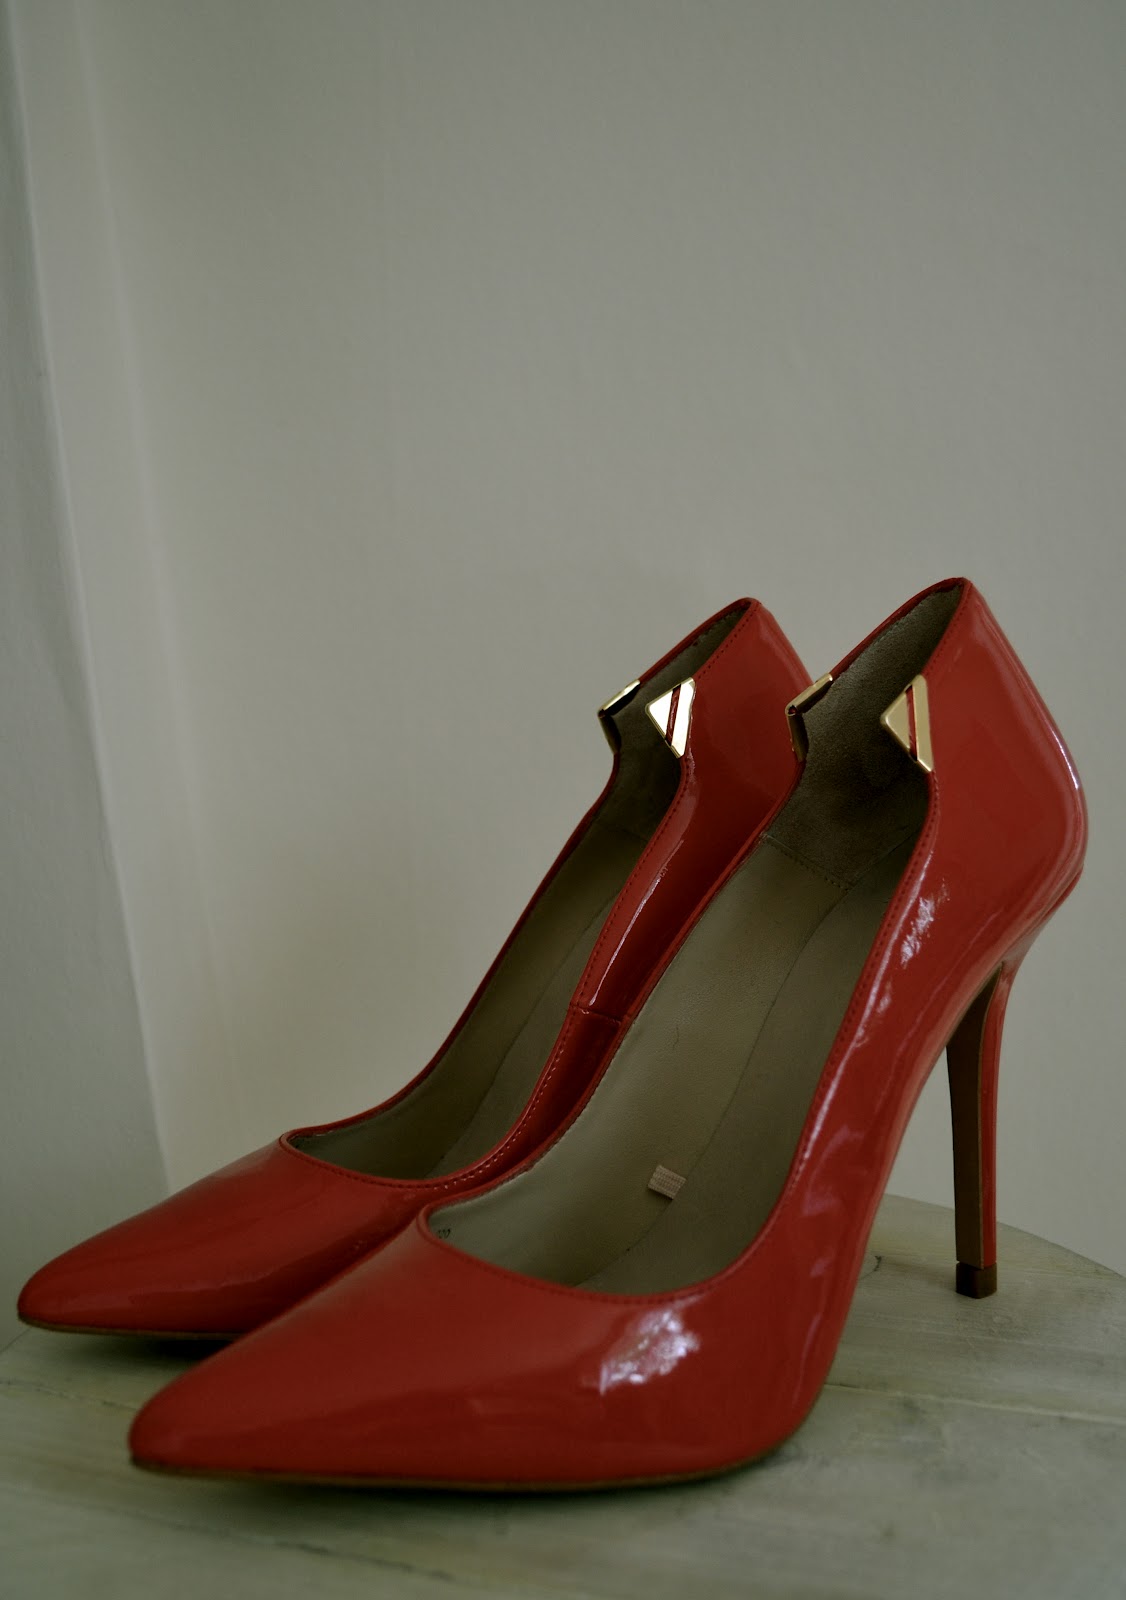 For The Love Of Emi: Red Stilettos